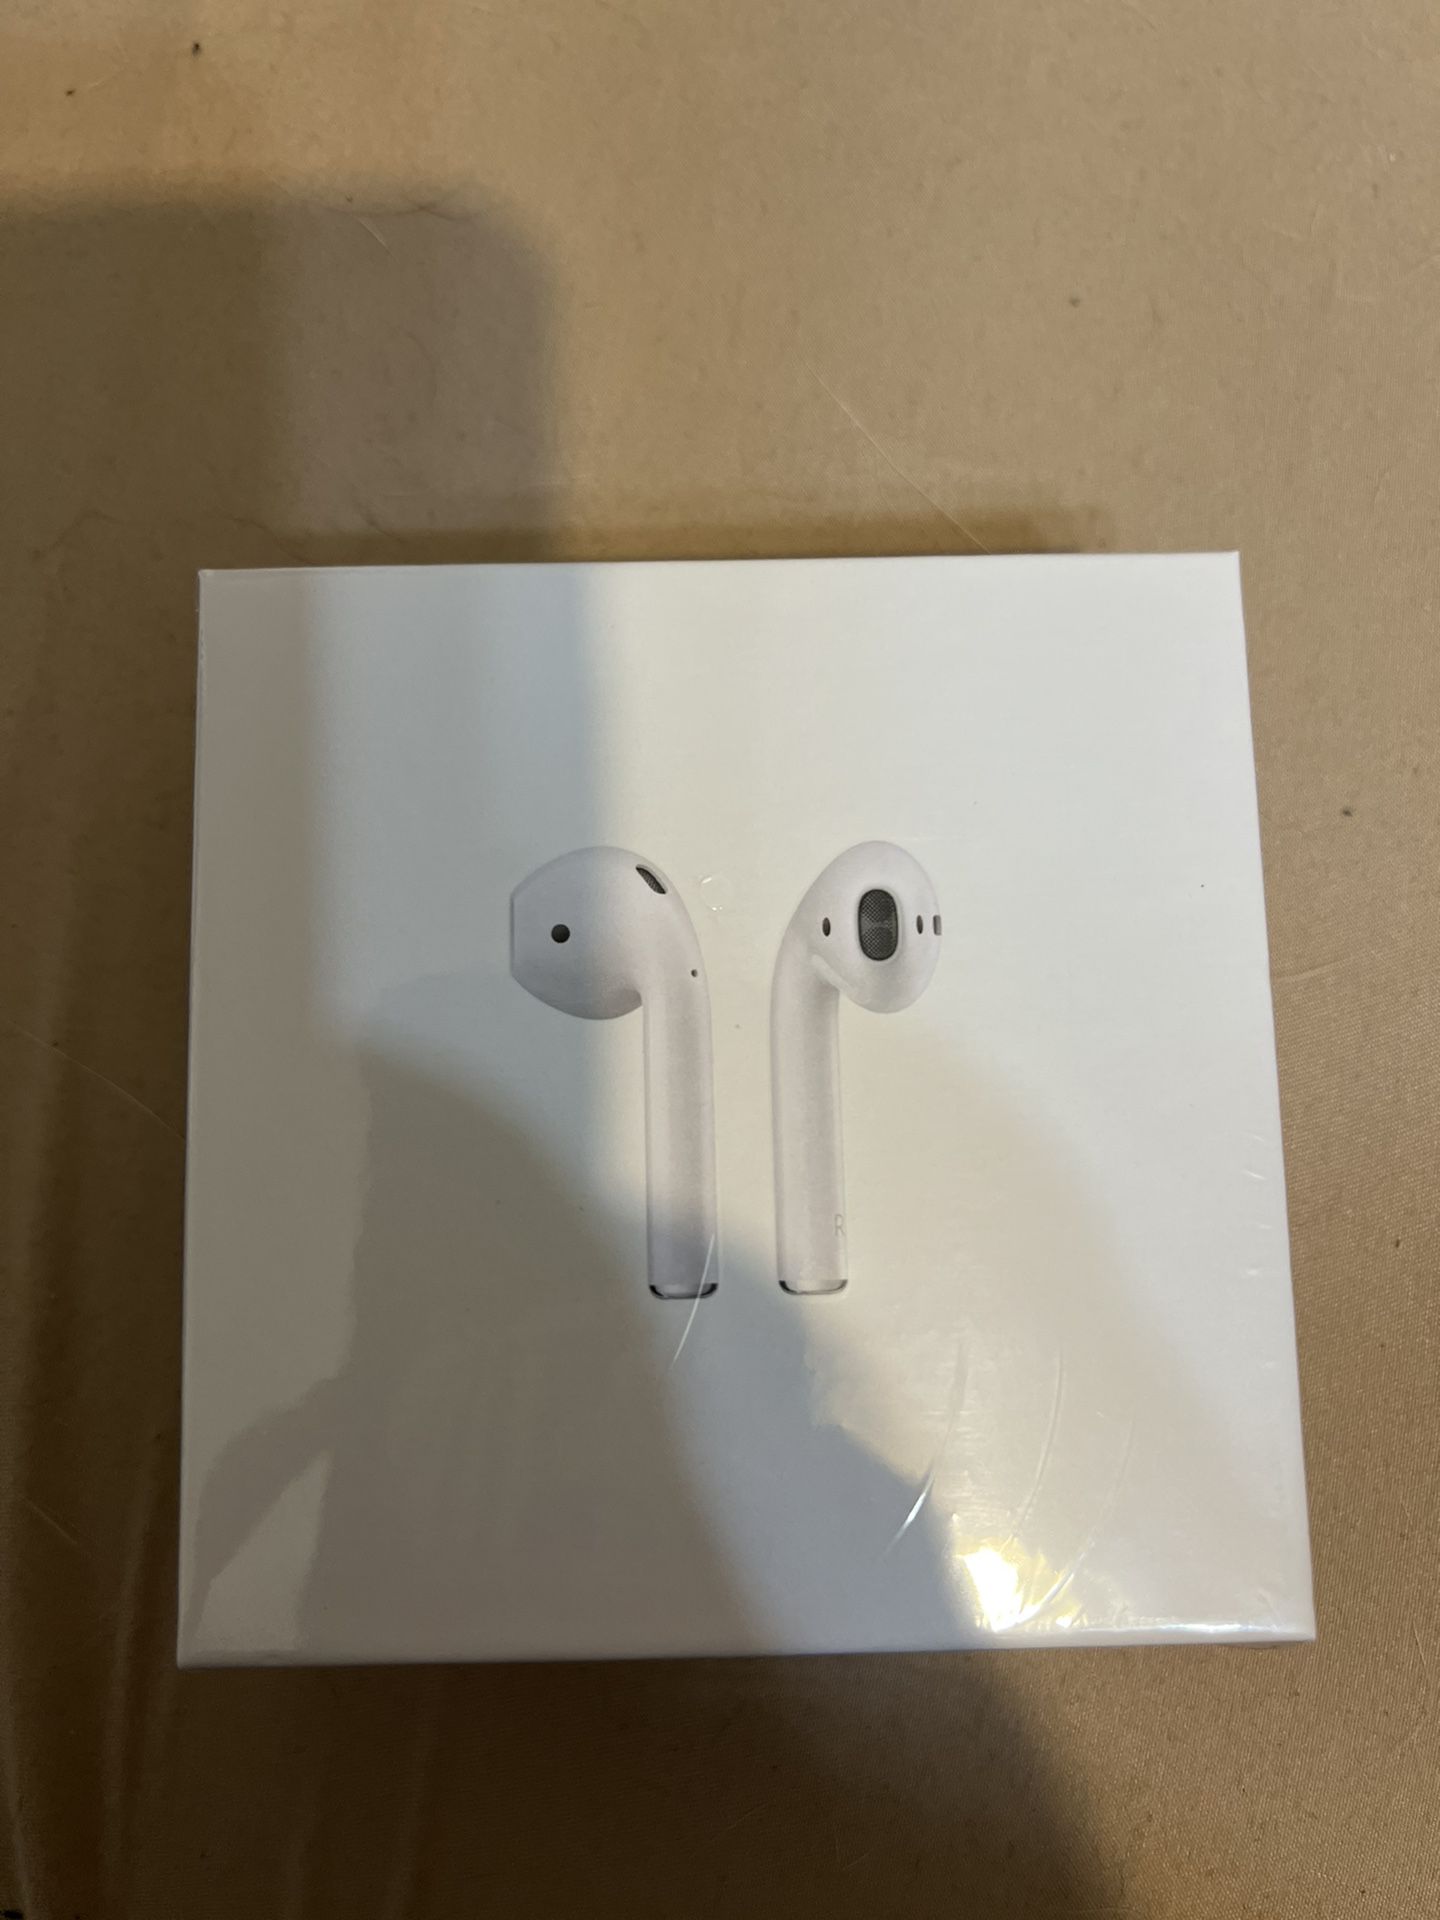 Airpod Wireless Charging Sealed